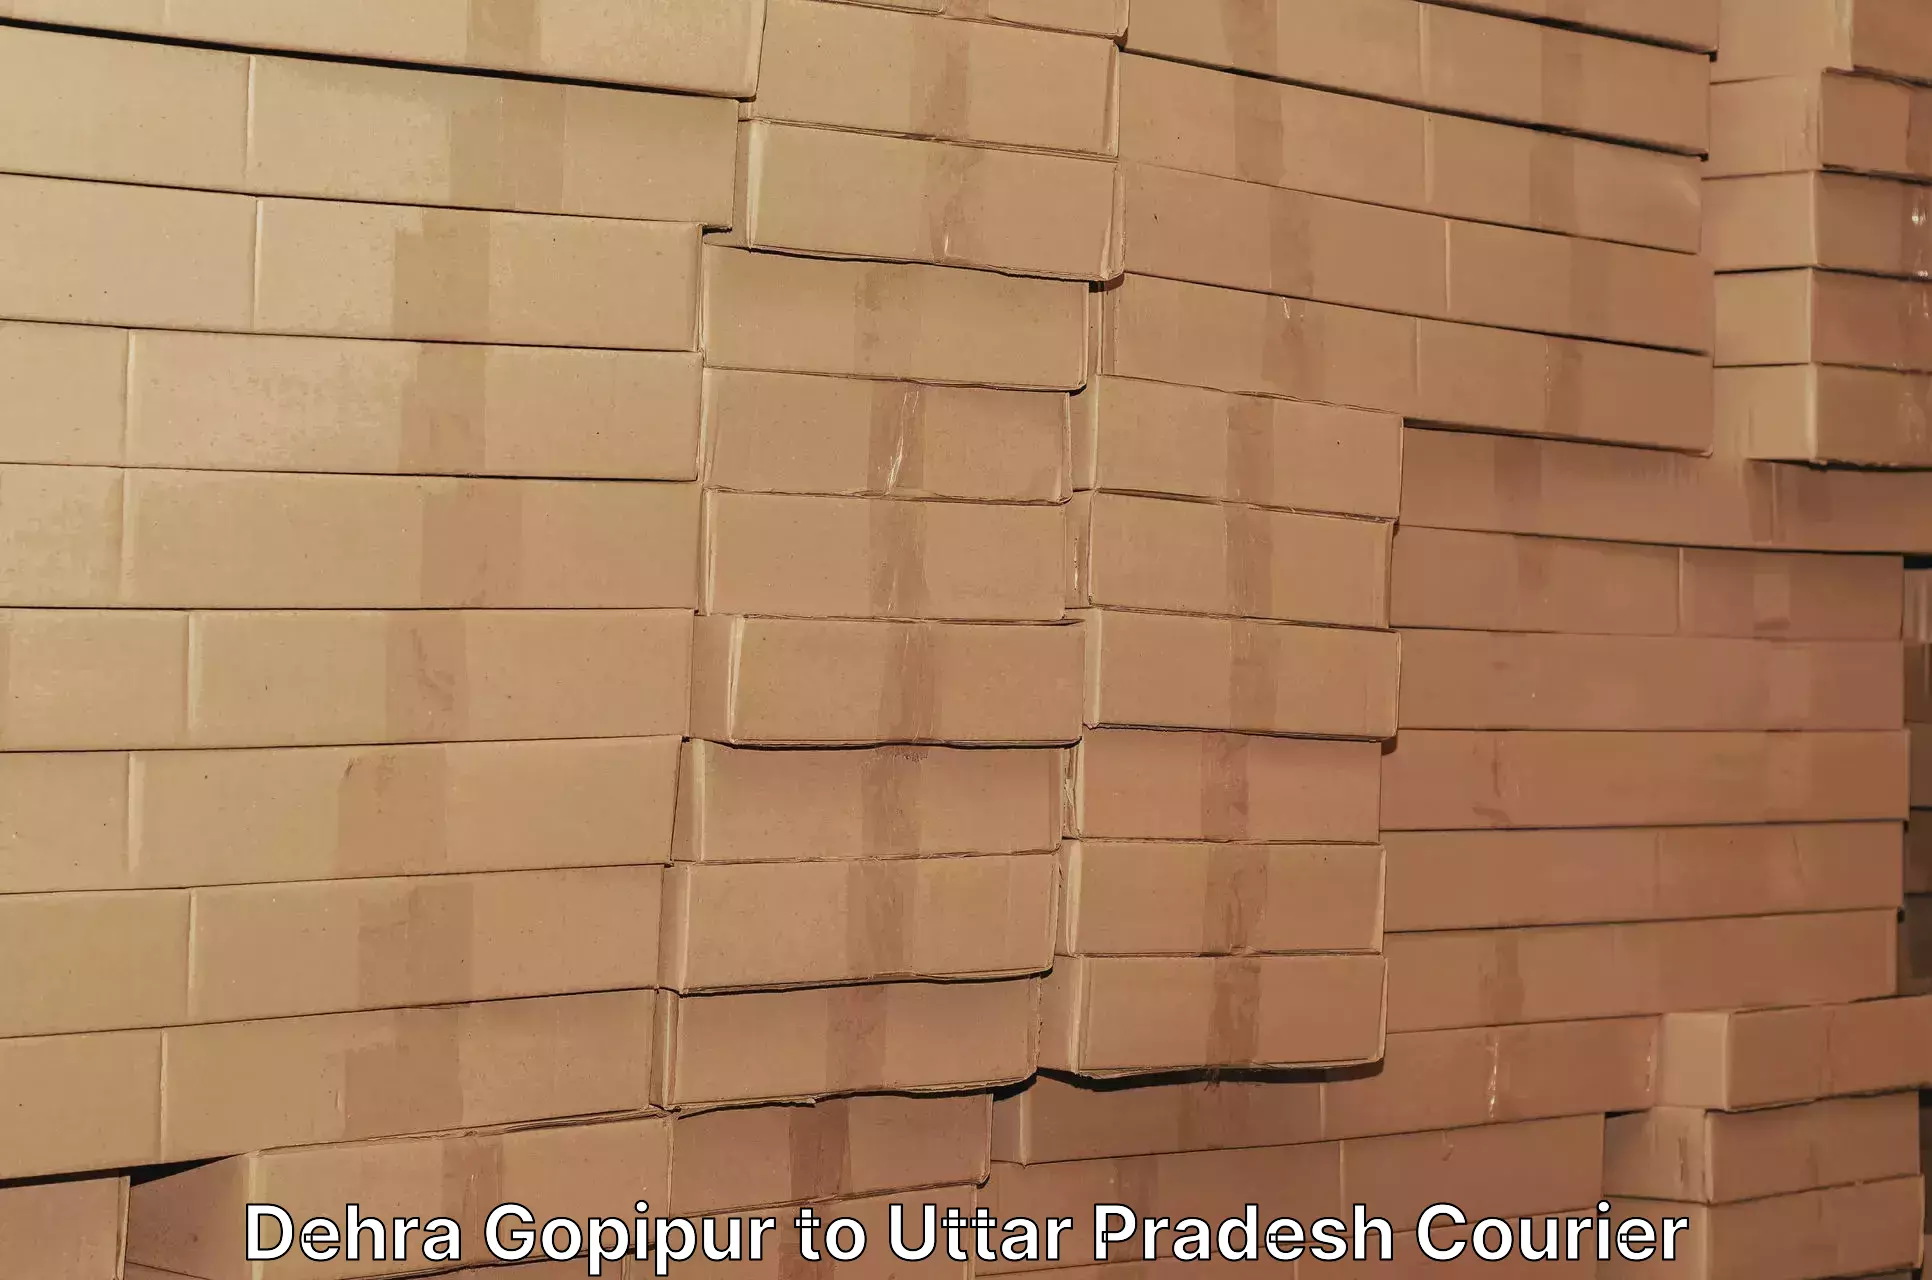 Bulk courier orders Dehra Gopipur to Bhathat